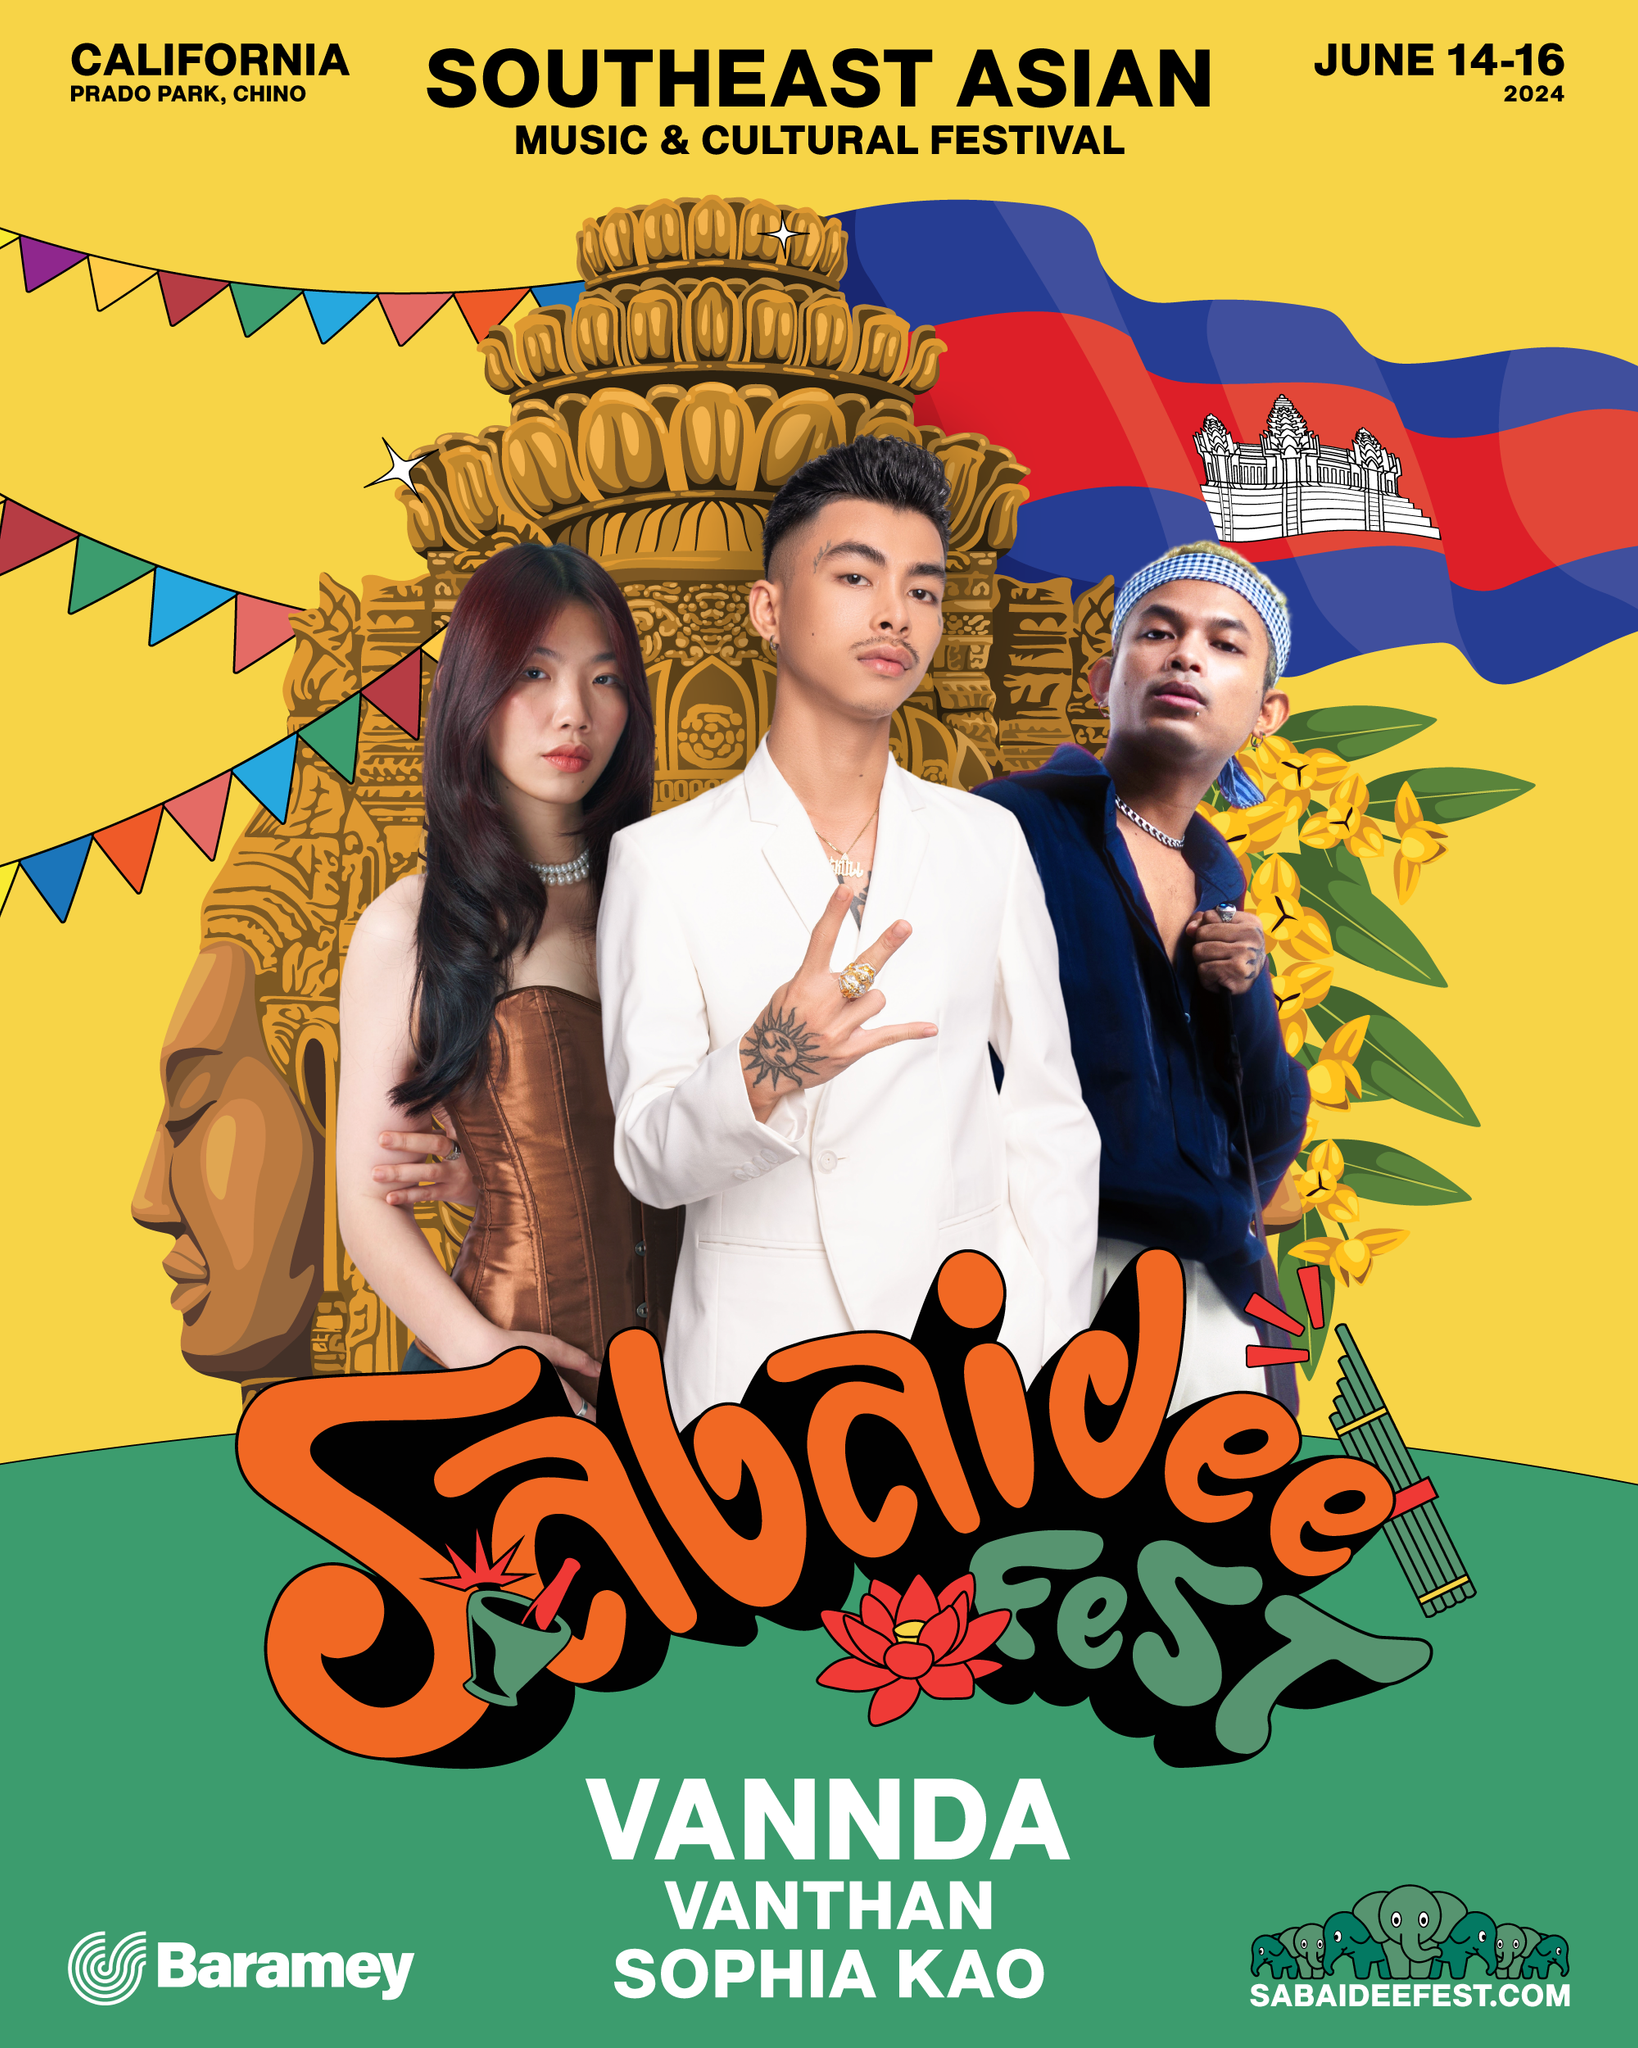 Announcement poster for Vannda Vanthan and Sophia Kao